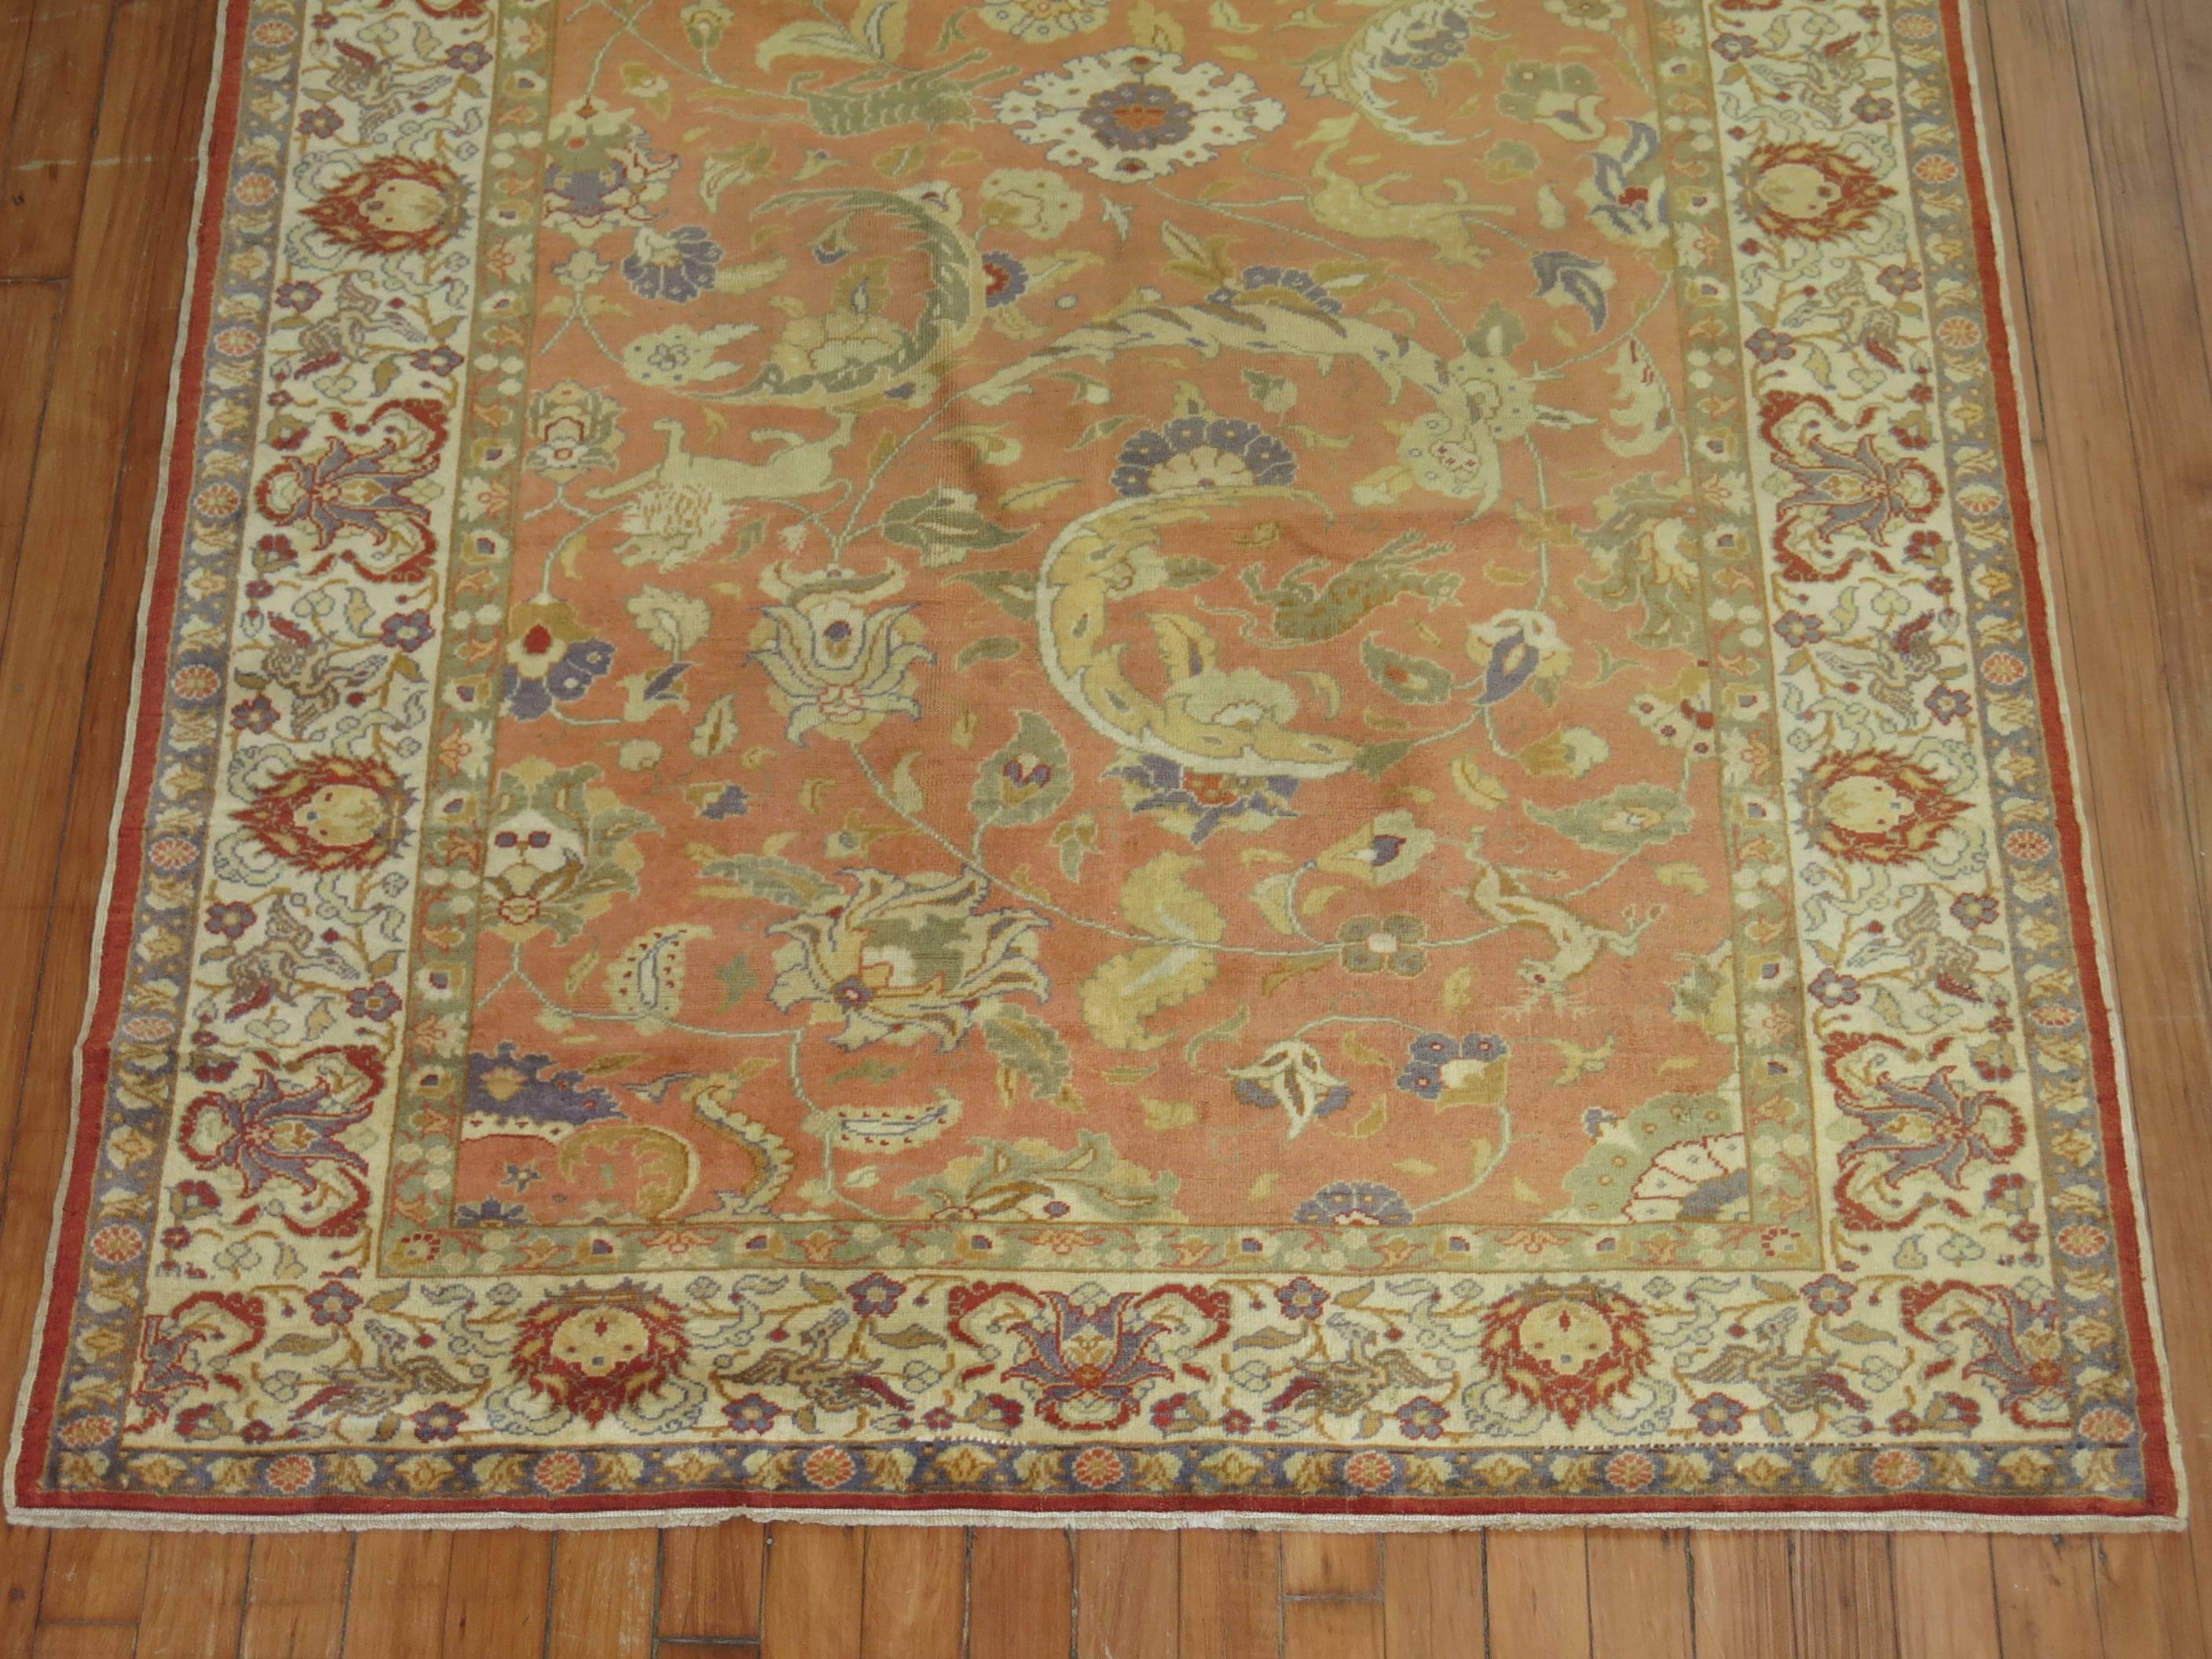 Turkish Pictorial rug with numerous animal figures found on a peach colored ground and antique white border. Pictorial pieces are also commonly used as decorative wall hangings.